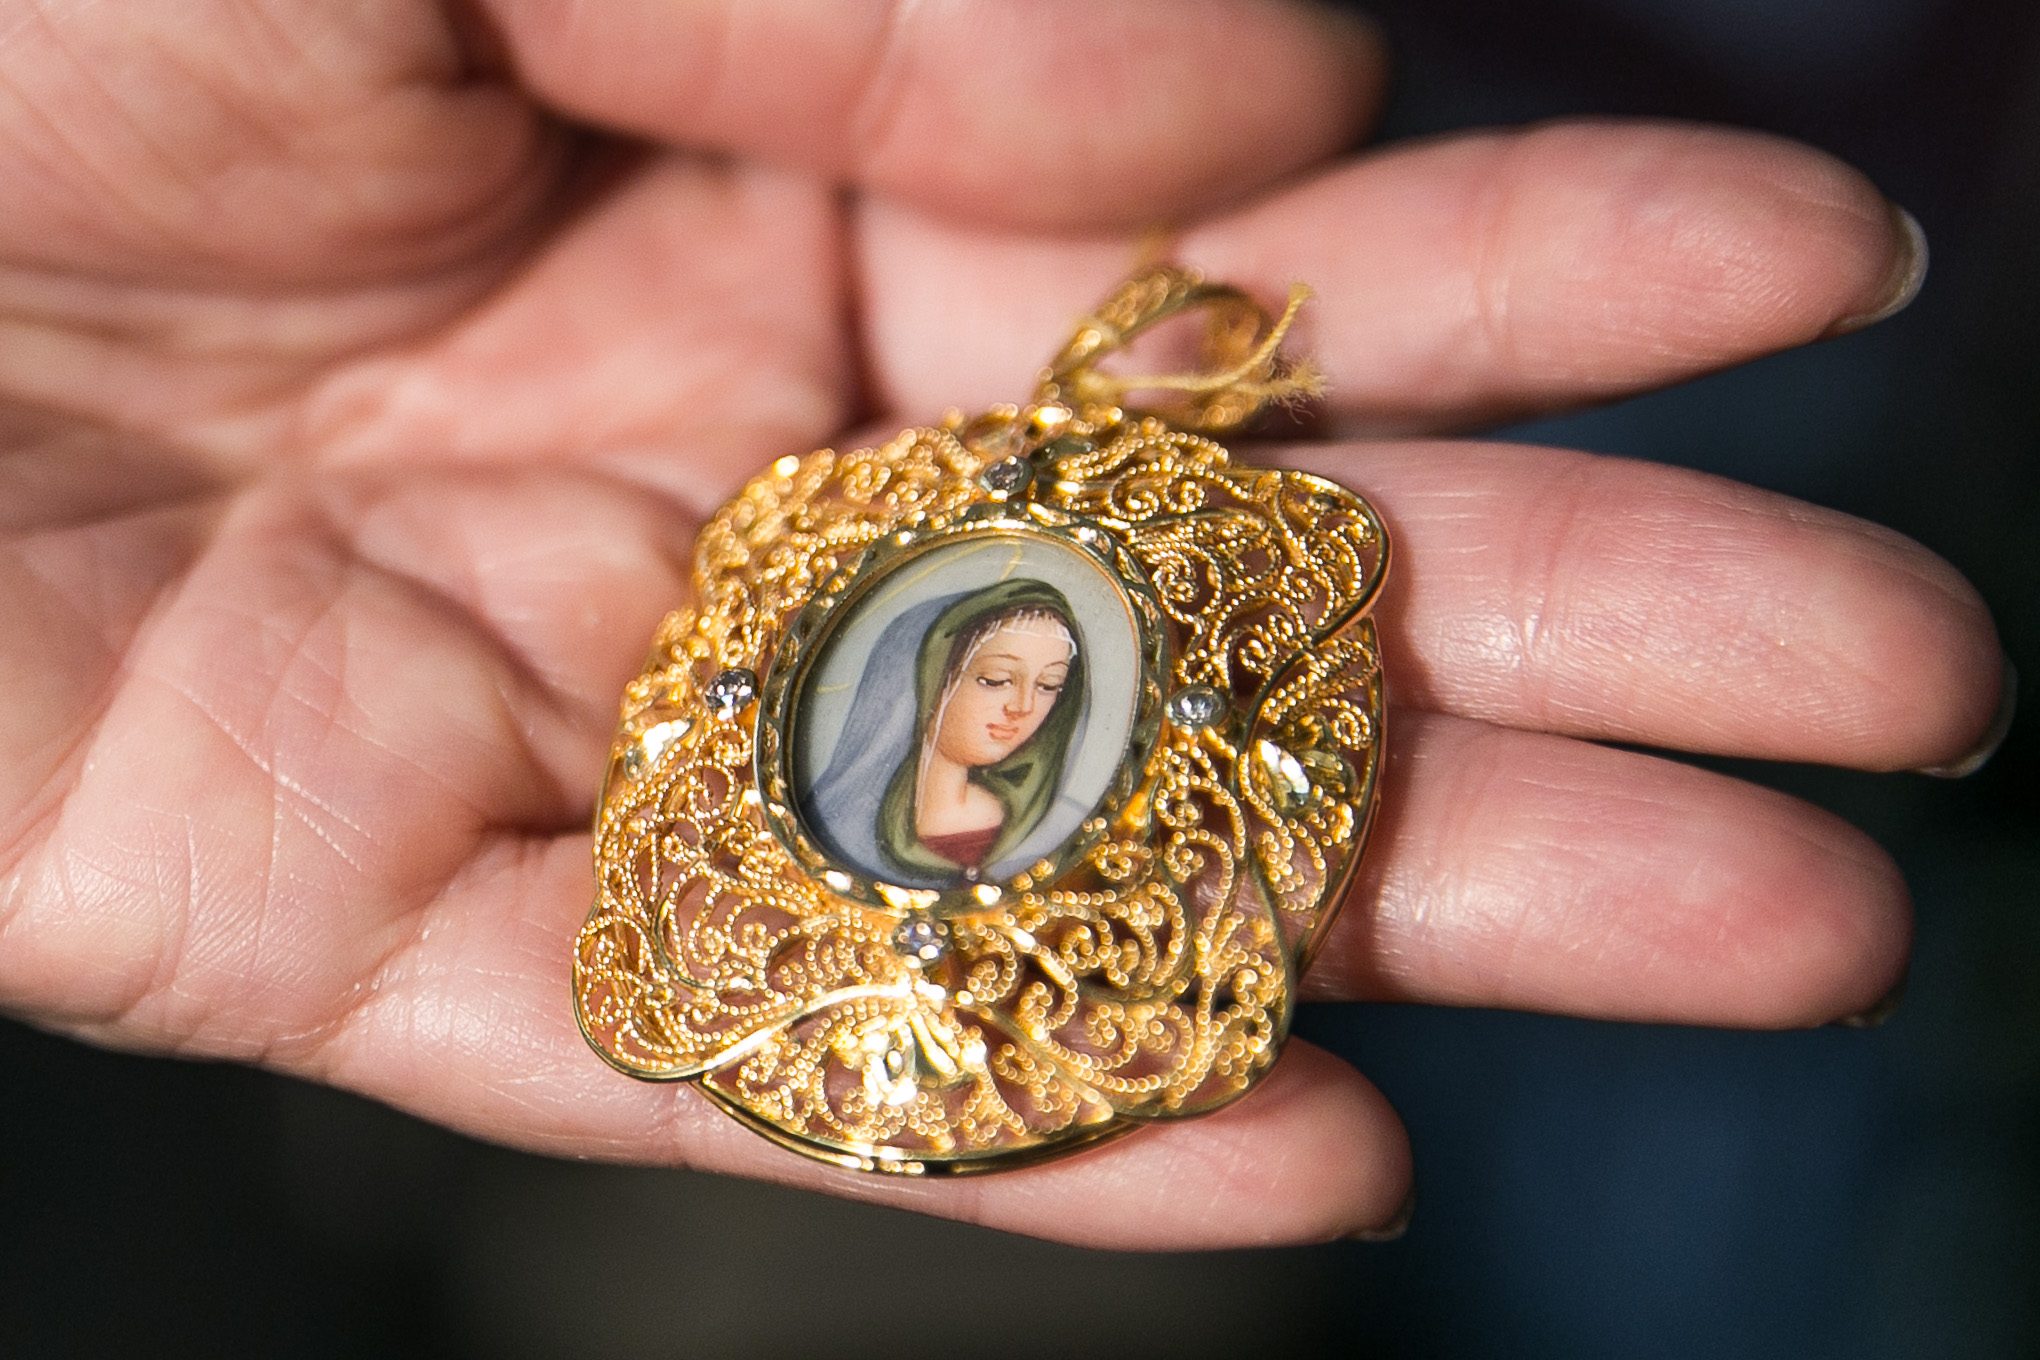 PENDANT. A miniature painting was turned into a pendant and encased in gold. Photo by Pat Nabong/Rappler